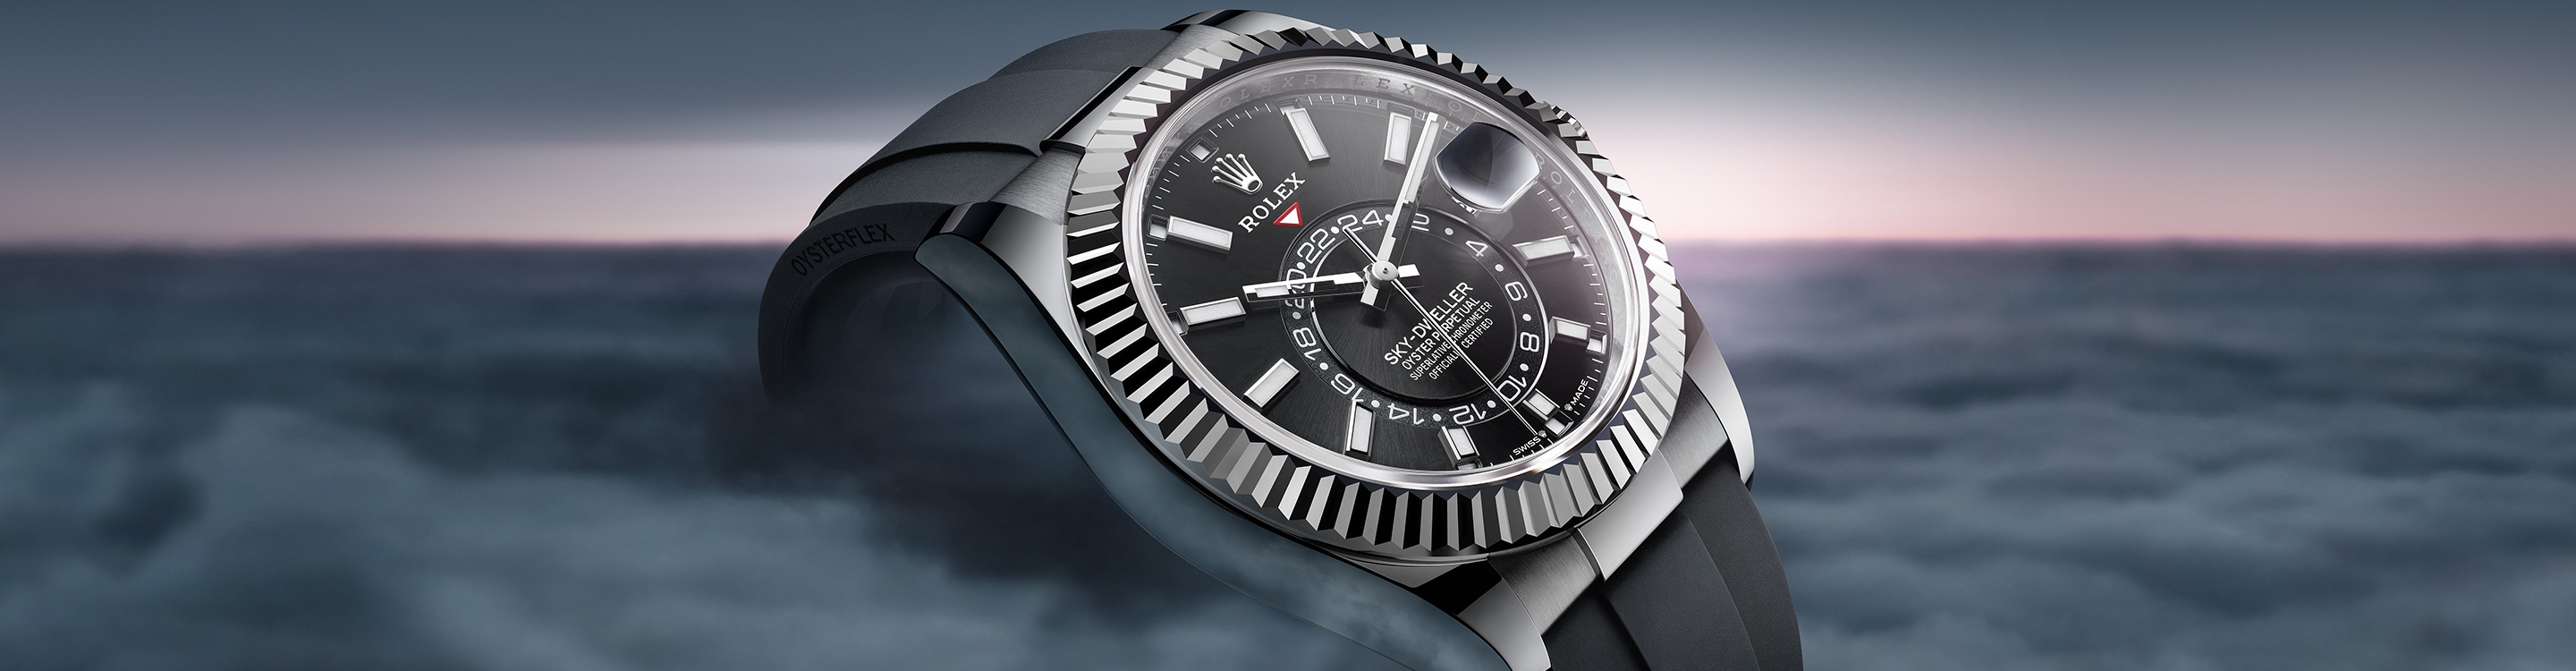 Rolex Sky-Dweller in Oystersteel, Oystersteel and gold, M336934-0001 | Europe Watch Company